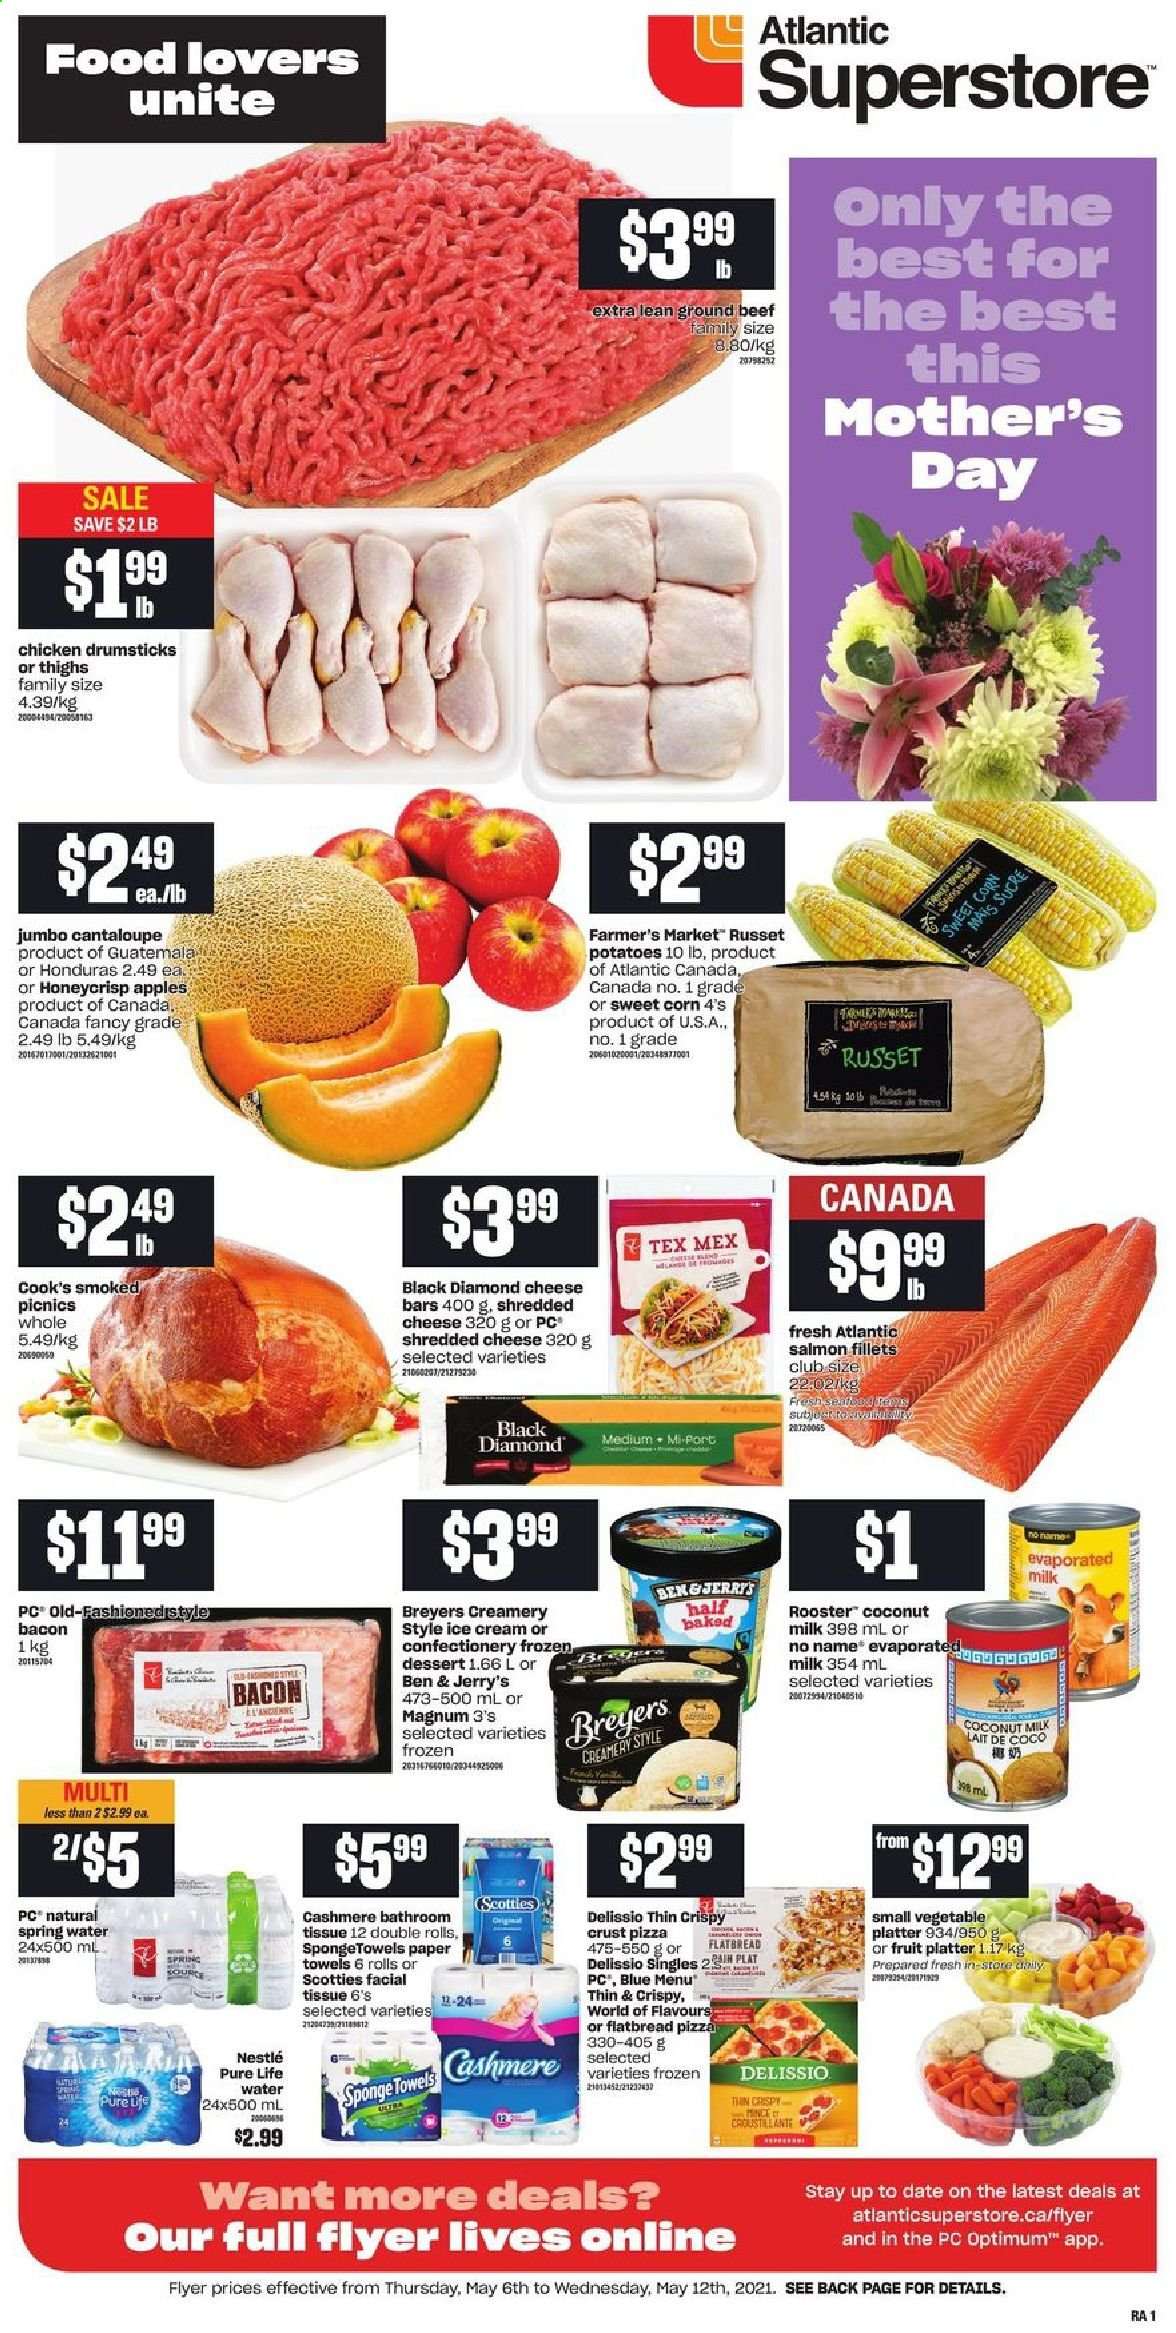 Atlantic Superstore flyer  - May 06, 2021 - May 12, 2021. Page 1.